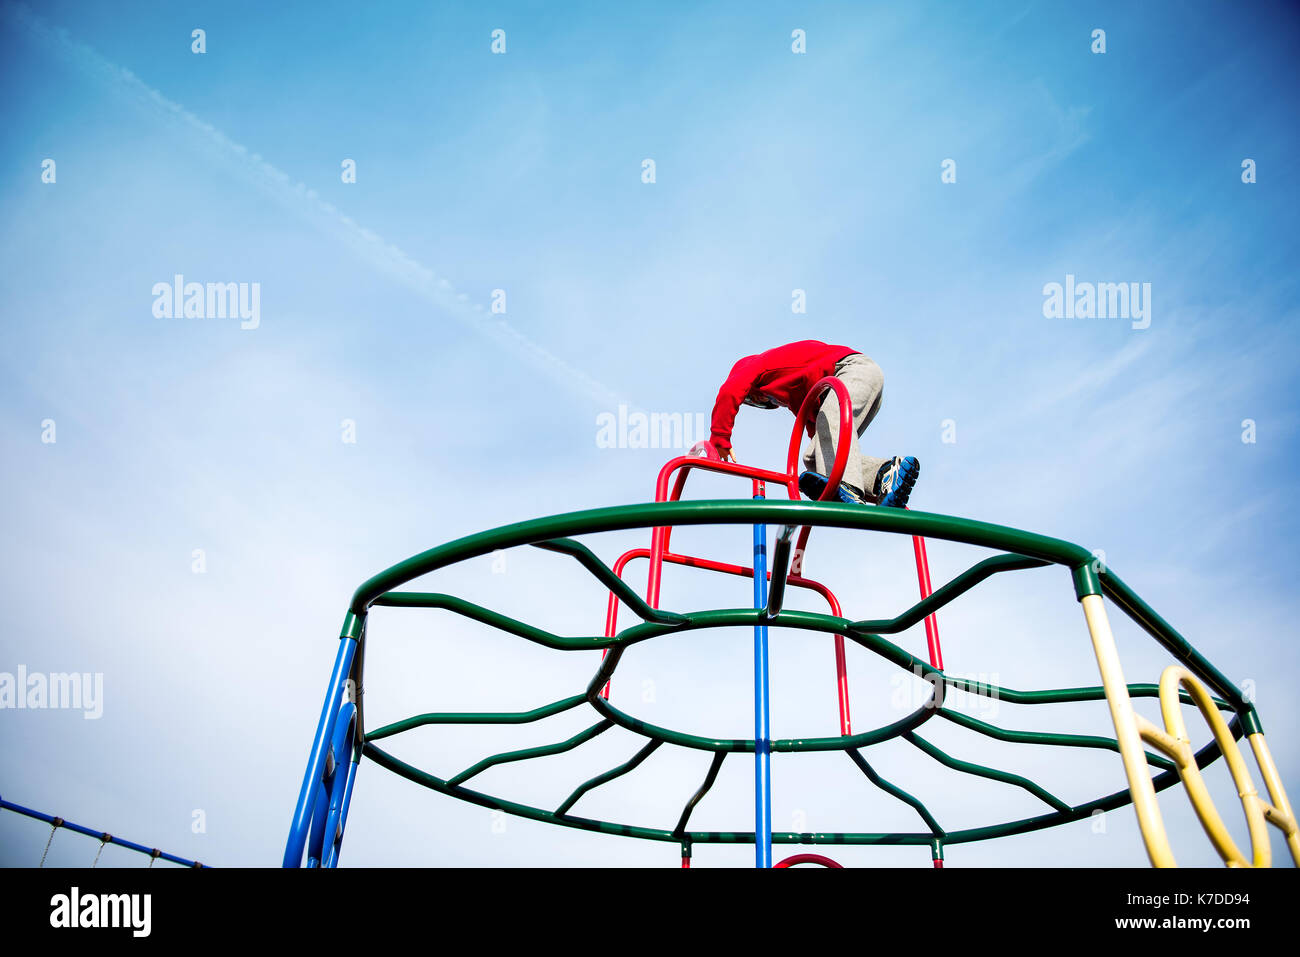 Low angle view of boy climbing on monkey bars against sky at playground Stock Photo